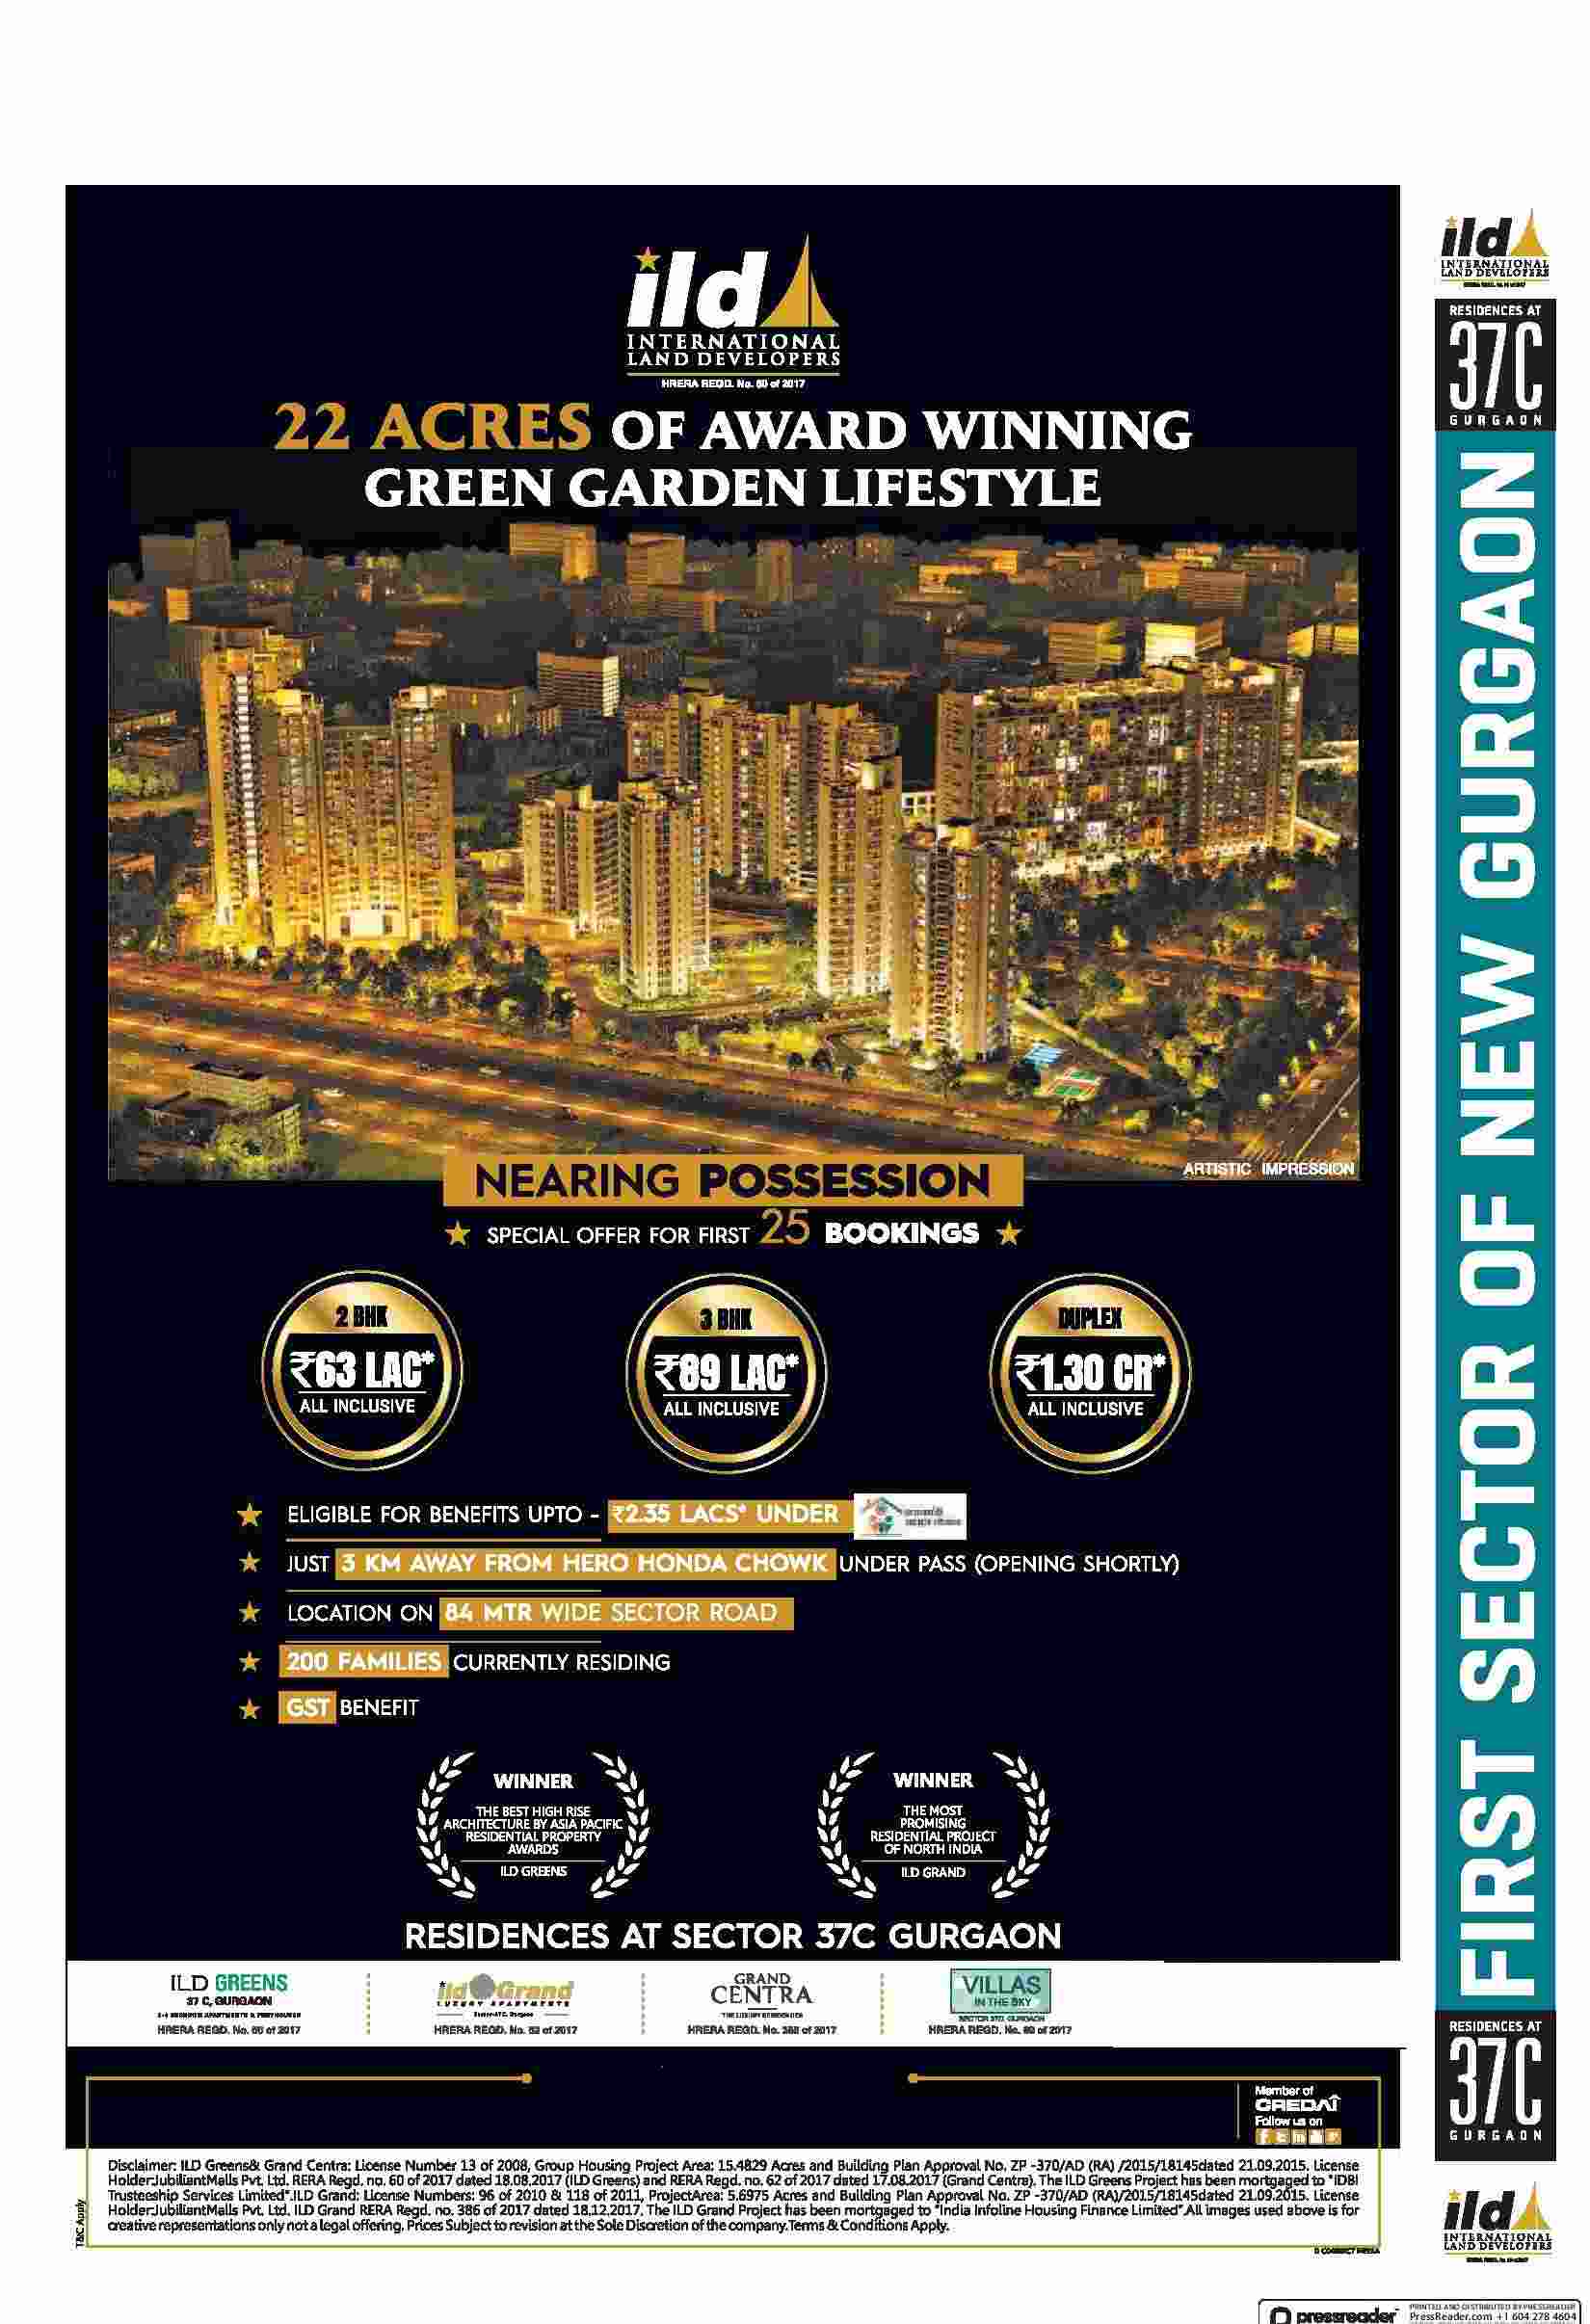 Book a home by ILD at Sector 37C & experience green garden lifestyle in Gurgaon